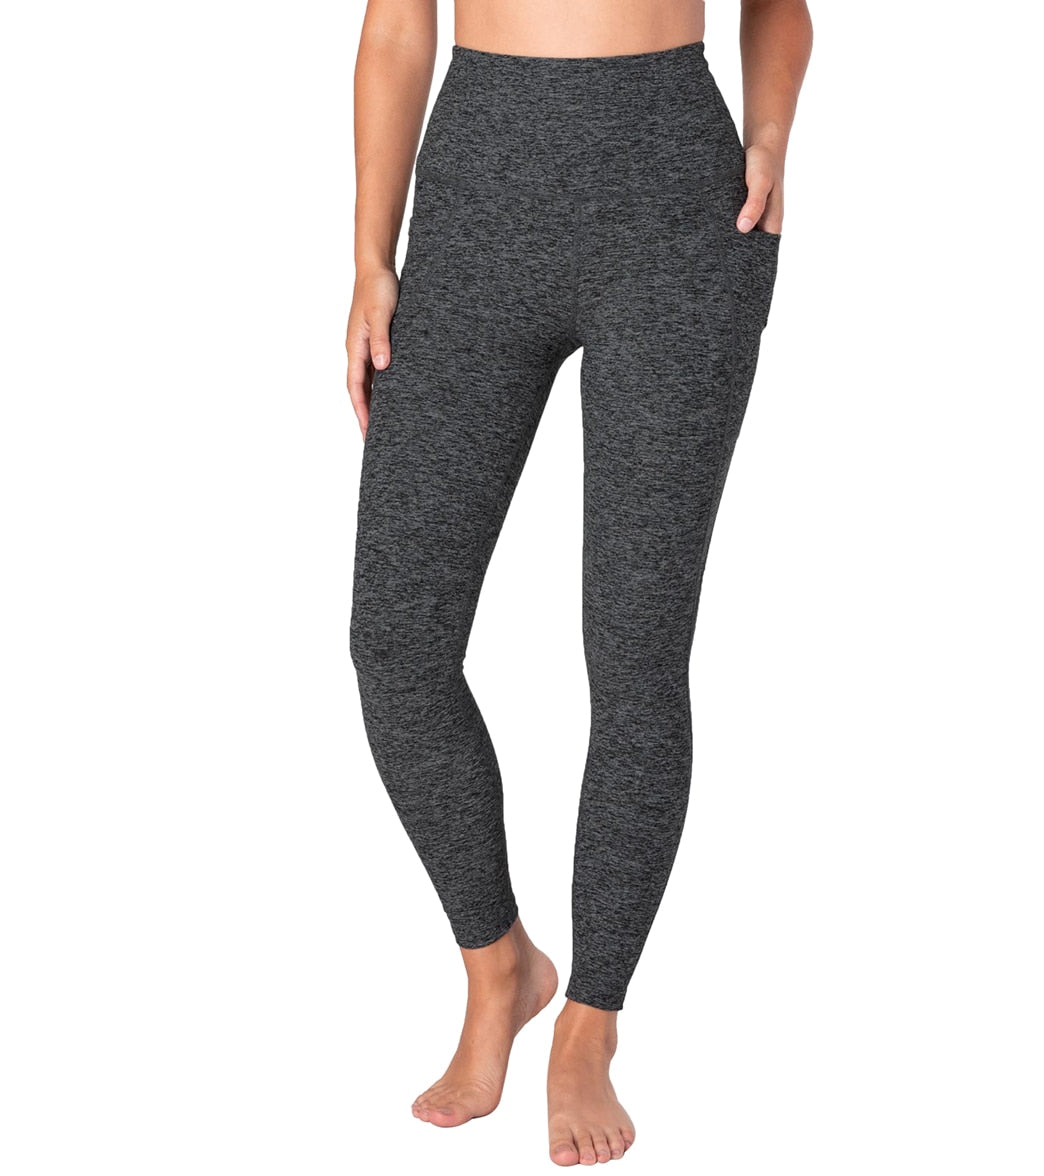 Beyond Yoga Bottoms: Ultimate Comfort & Style for Every Activity